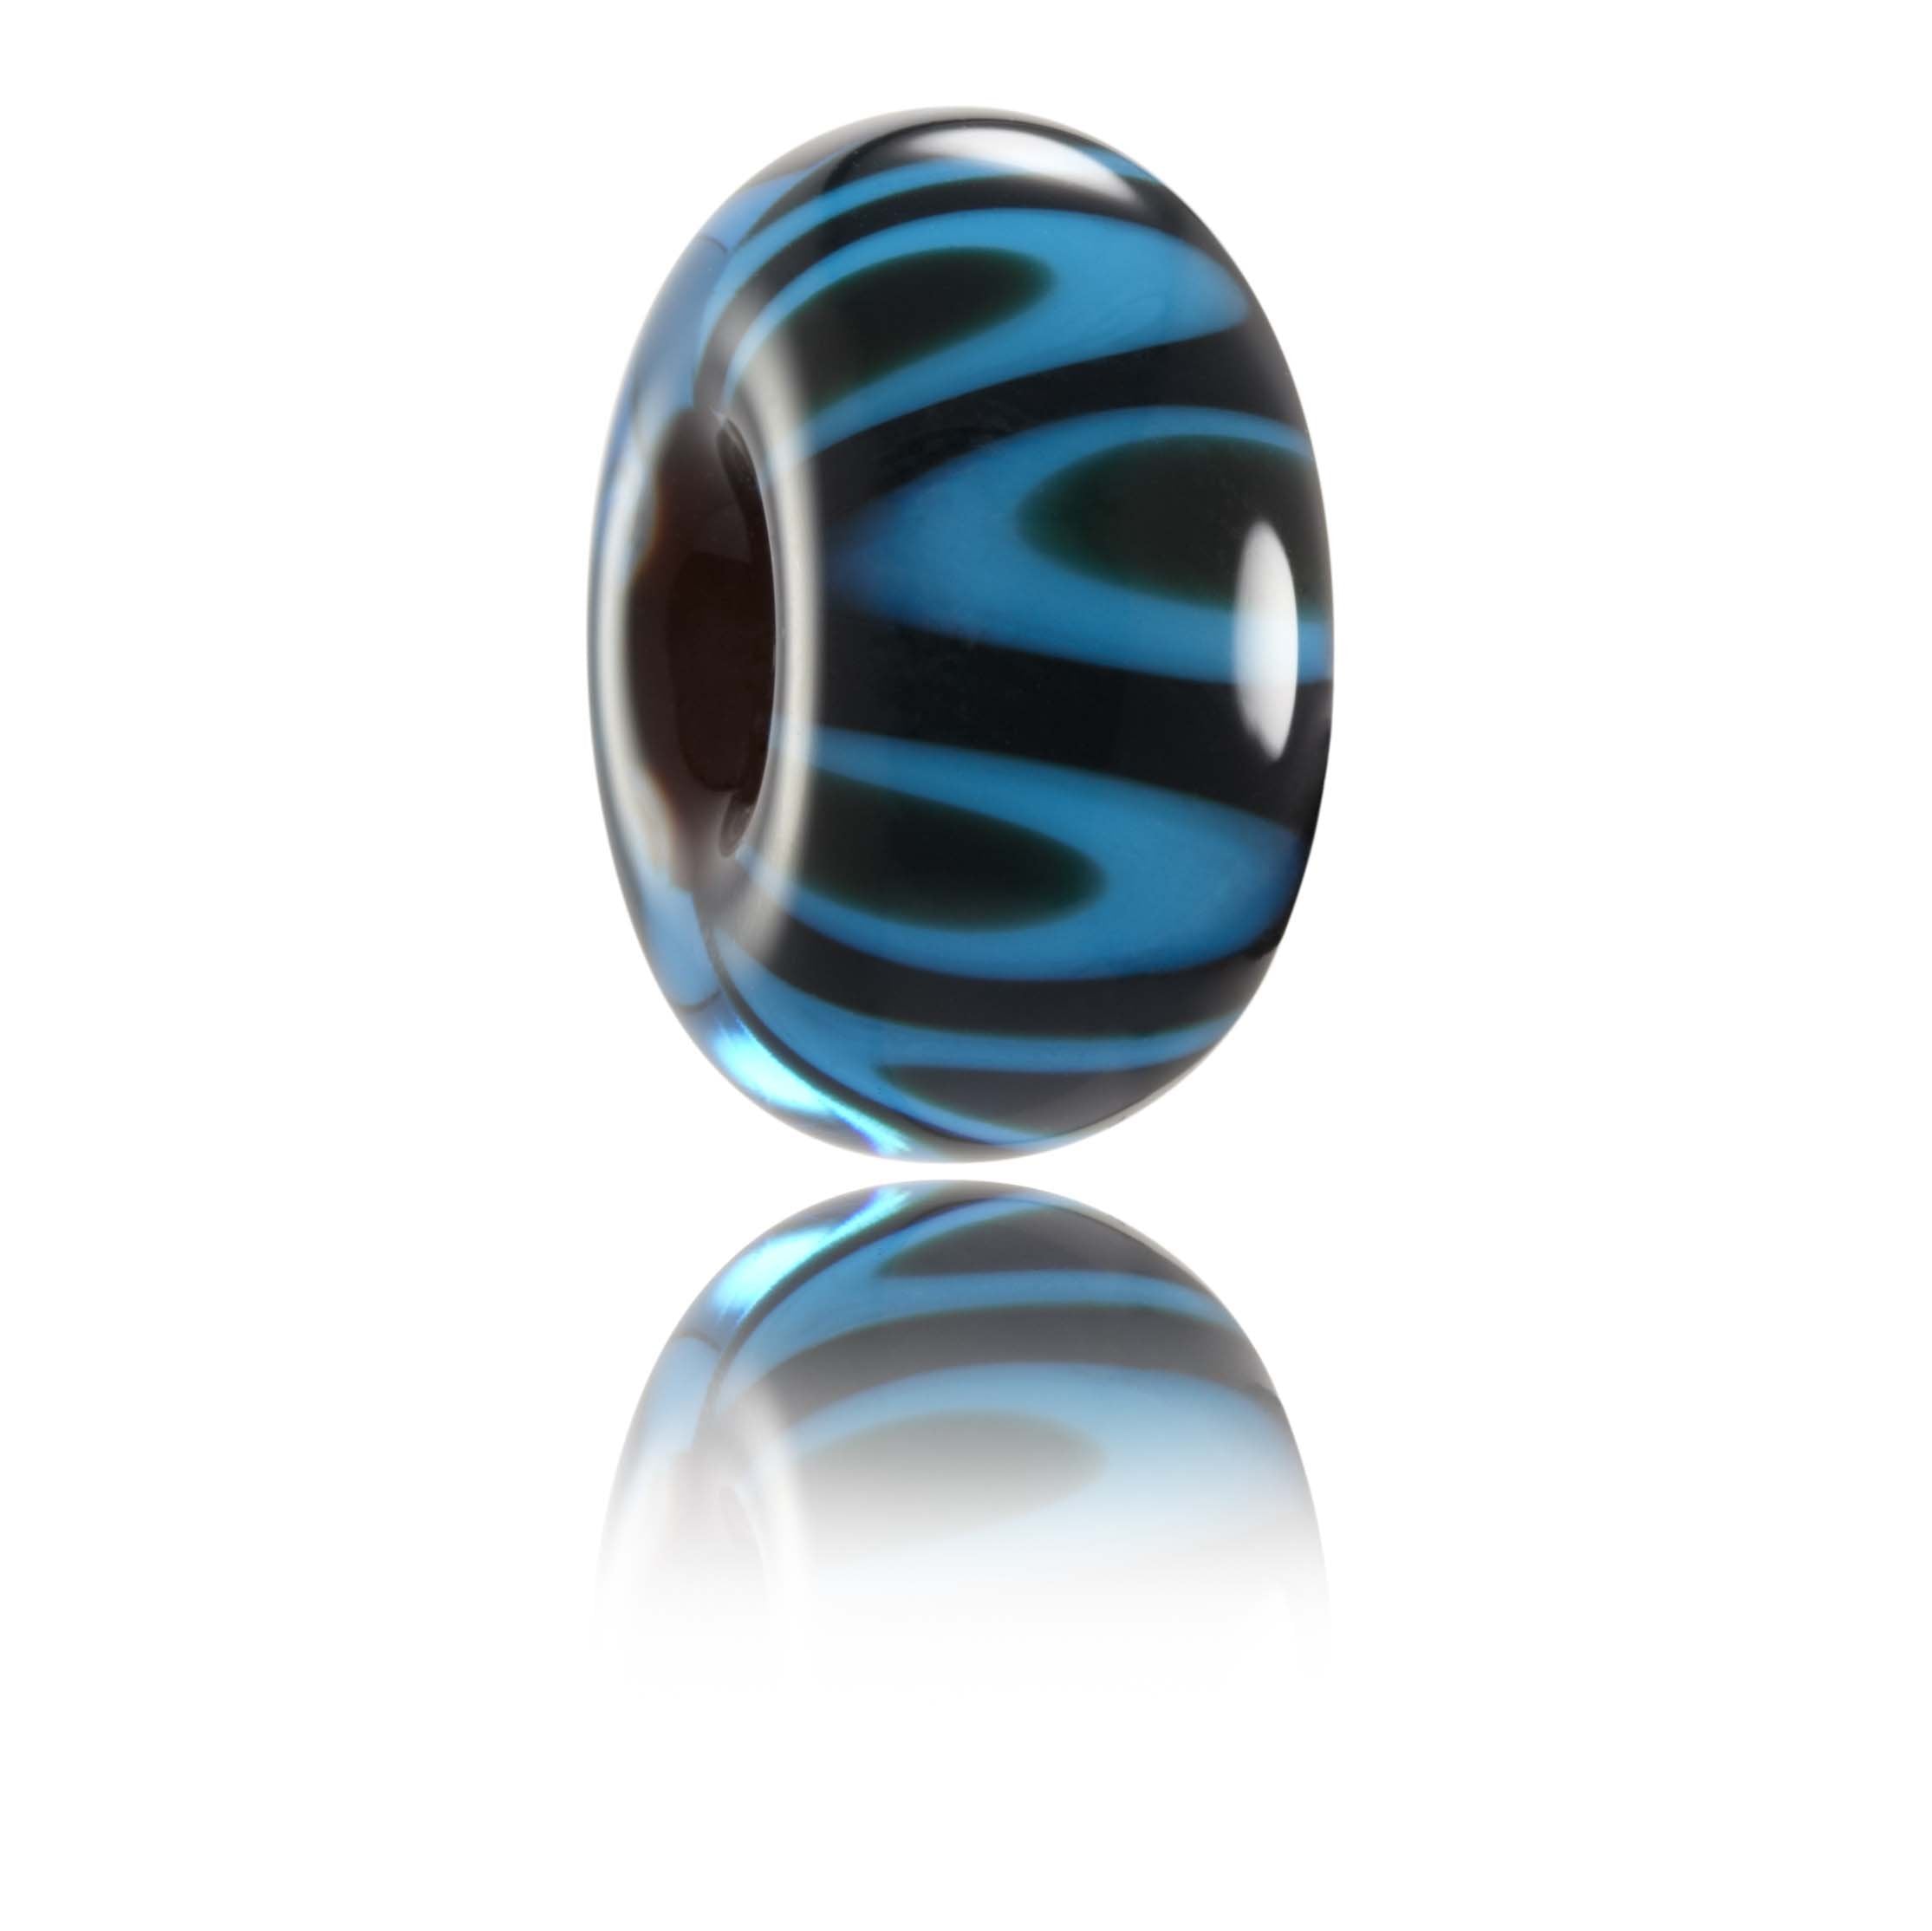 Deep dark blue glass bead with small islands beneath the surface, inspired by the island of Bali in Indonesia.